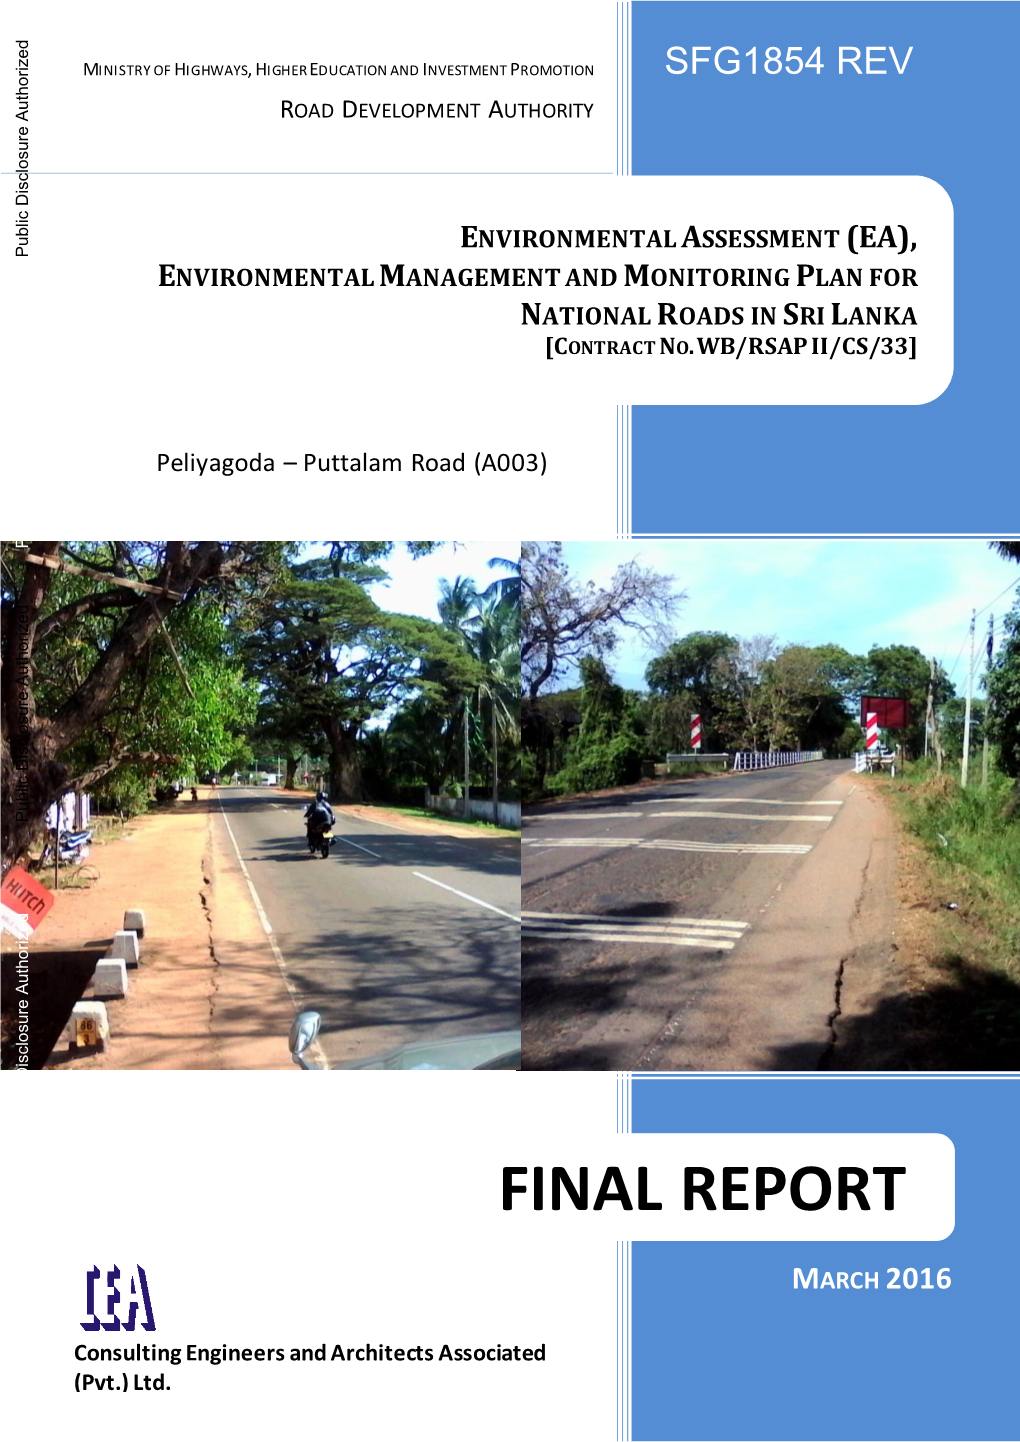 ENVIRONMENTAL ASSESSMENT (EA), Public Disclosure Authorized ENVIRONMENTAL MANAGEMENT and MONITORING PLAN for NATIONAL ROADS in SRI LANKA [CONTRACT NO